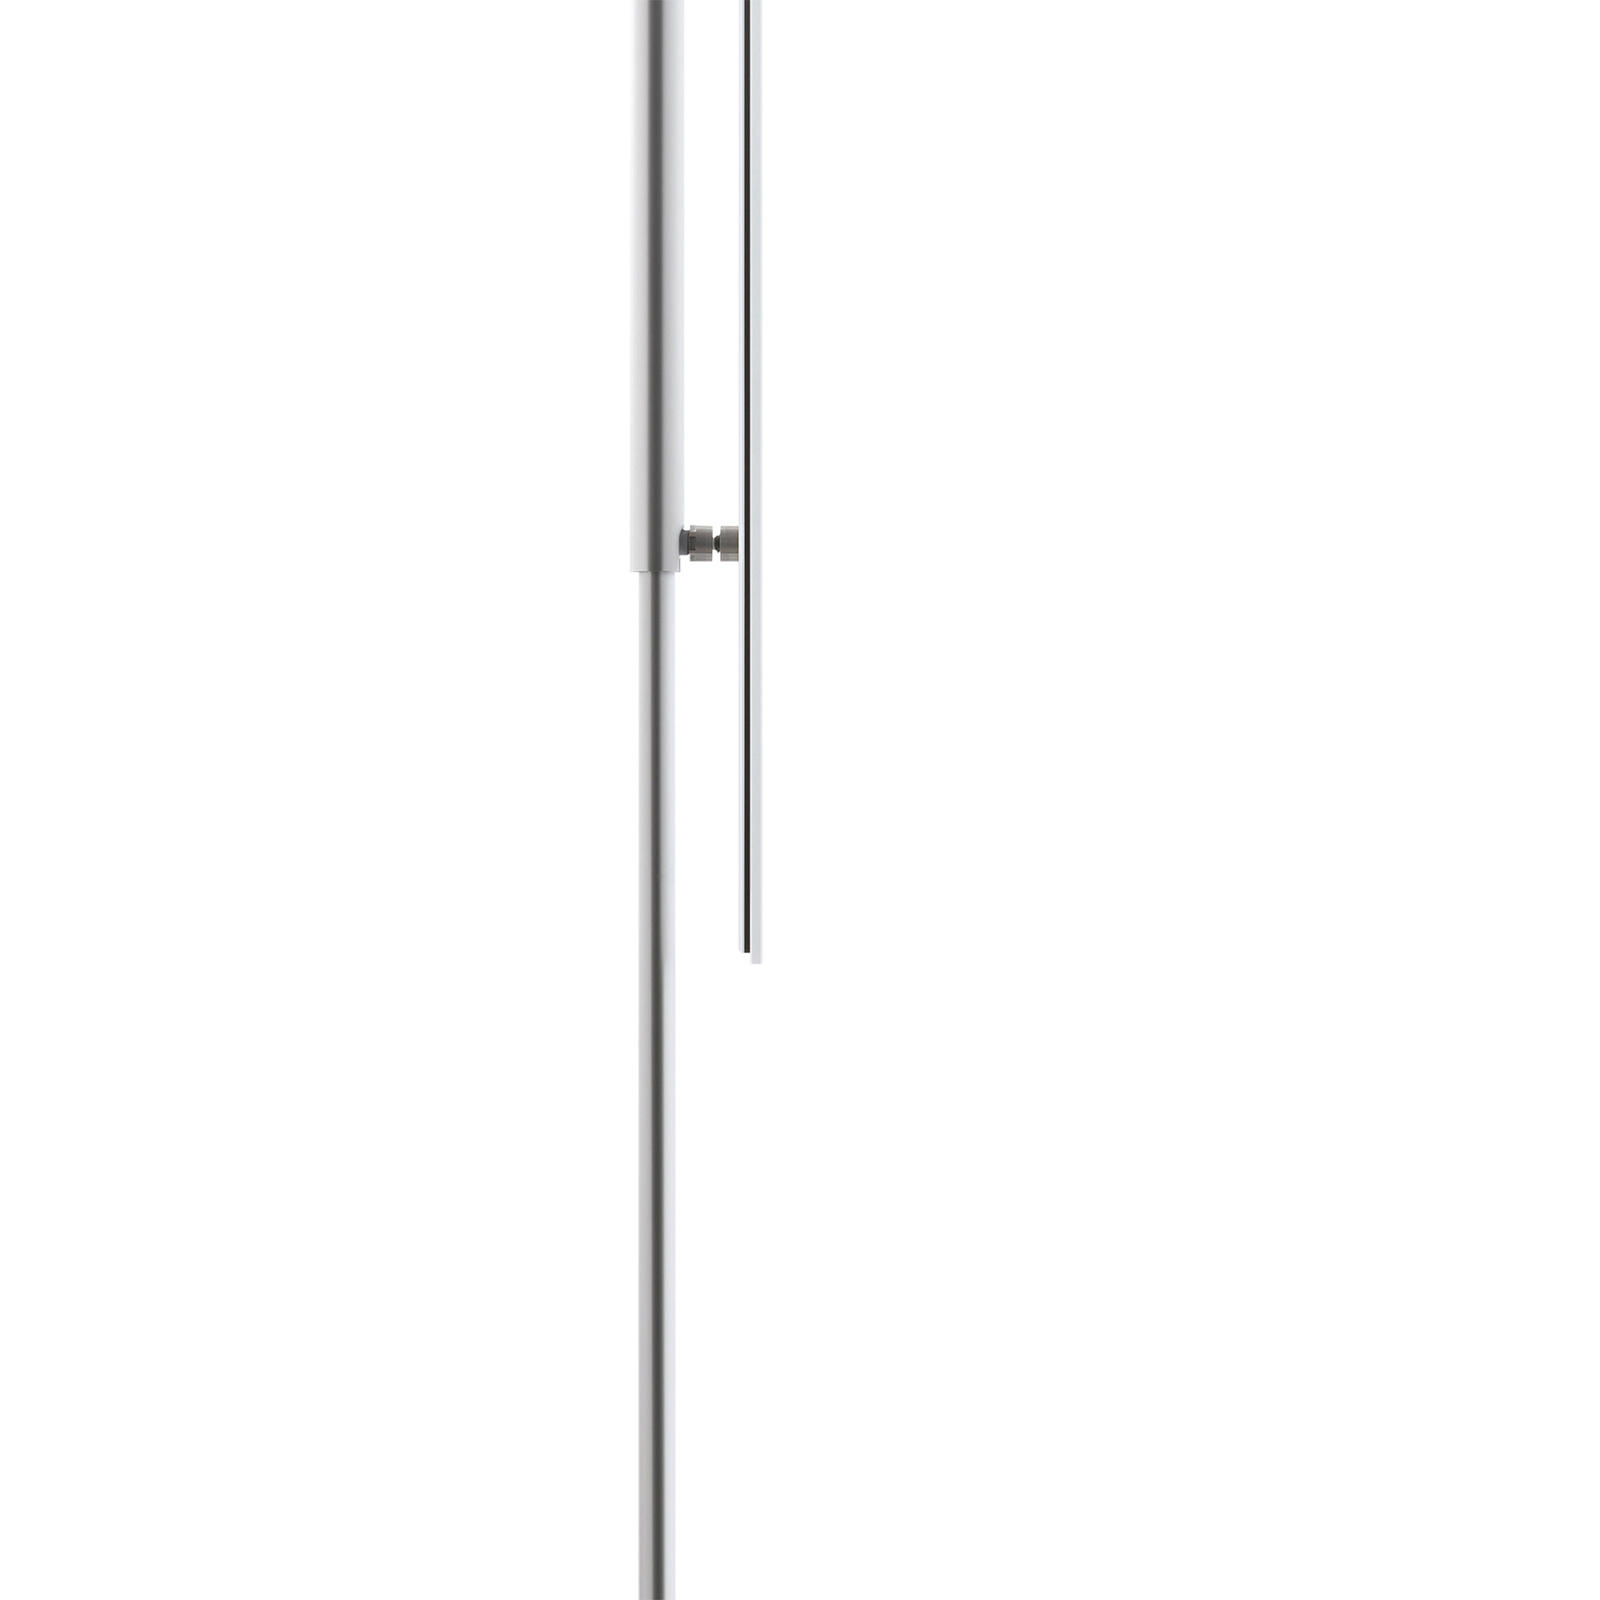 OMLED One f3l - black floor lamp with OLEDs